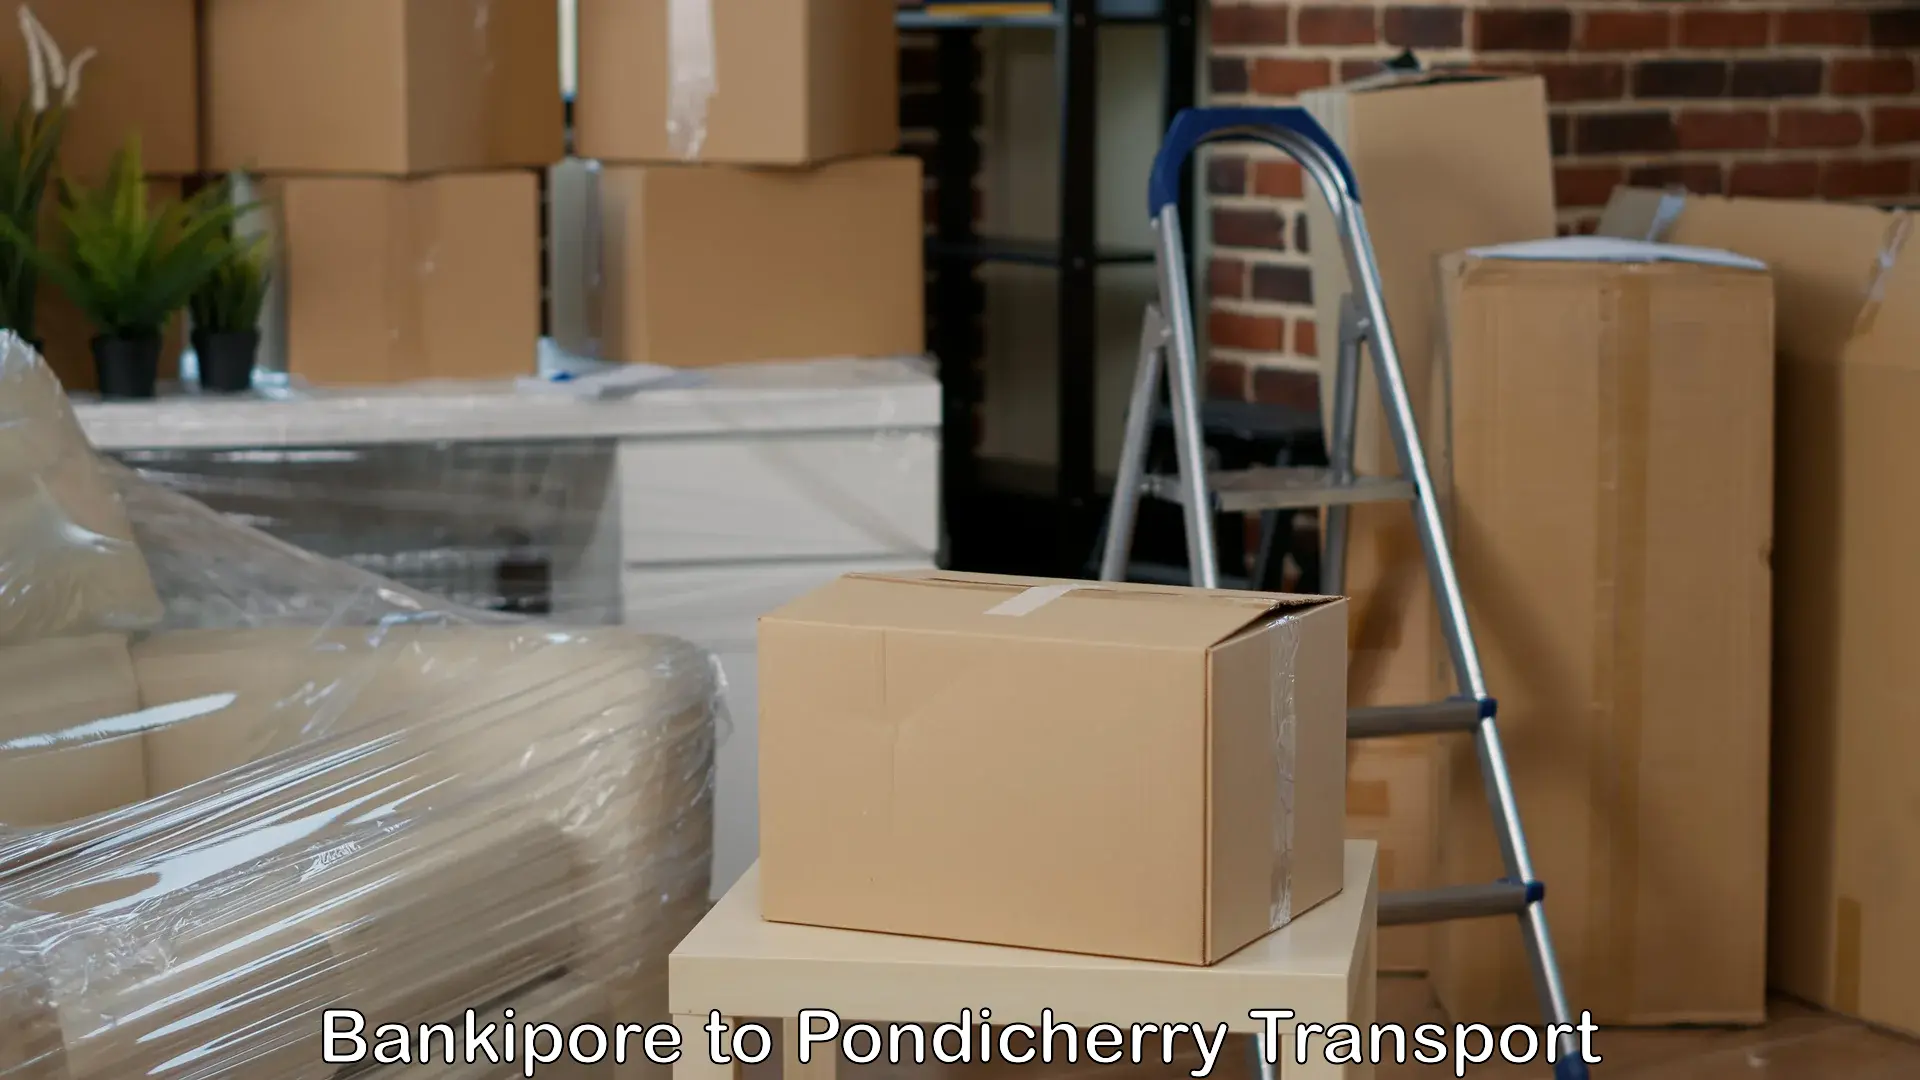 Daily parcel service transport Bankipore to Pondicherry